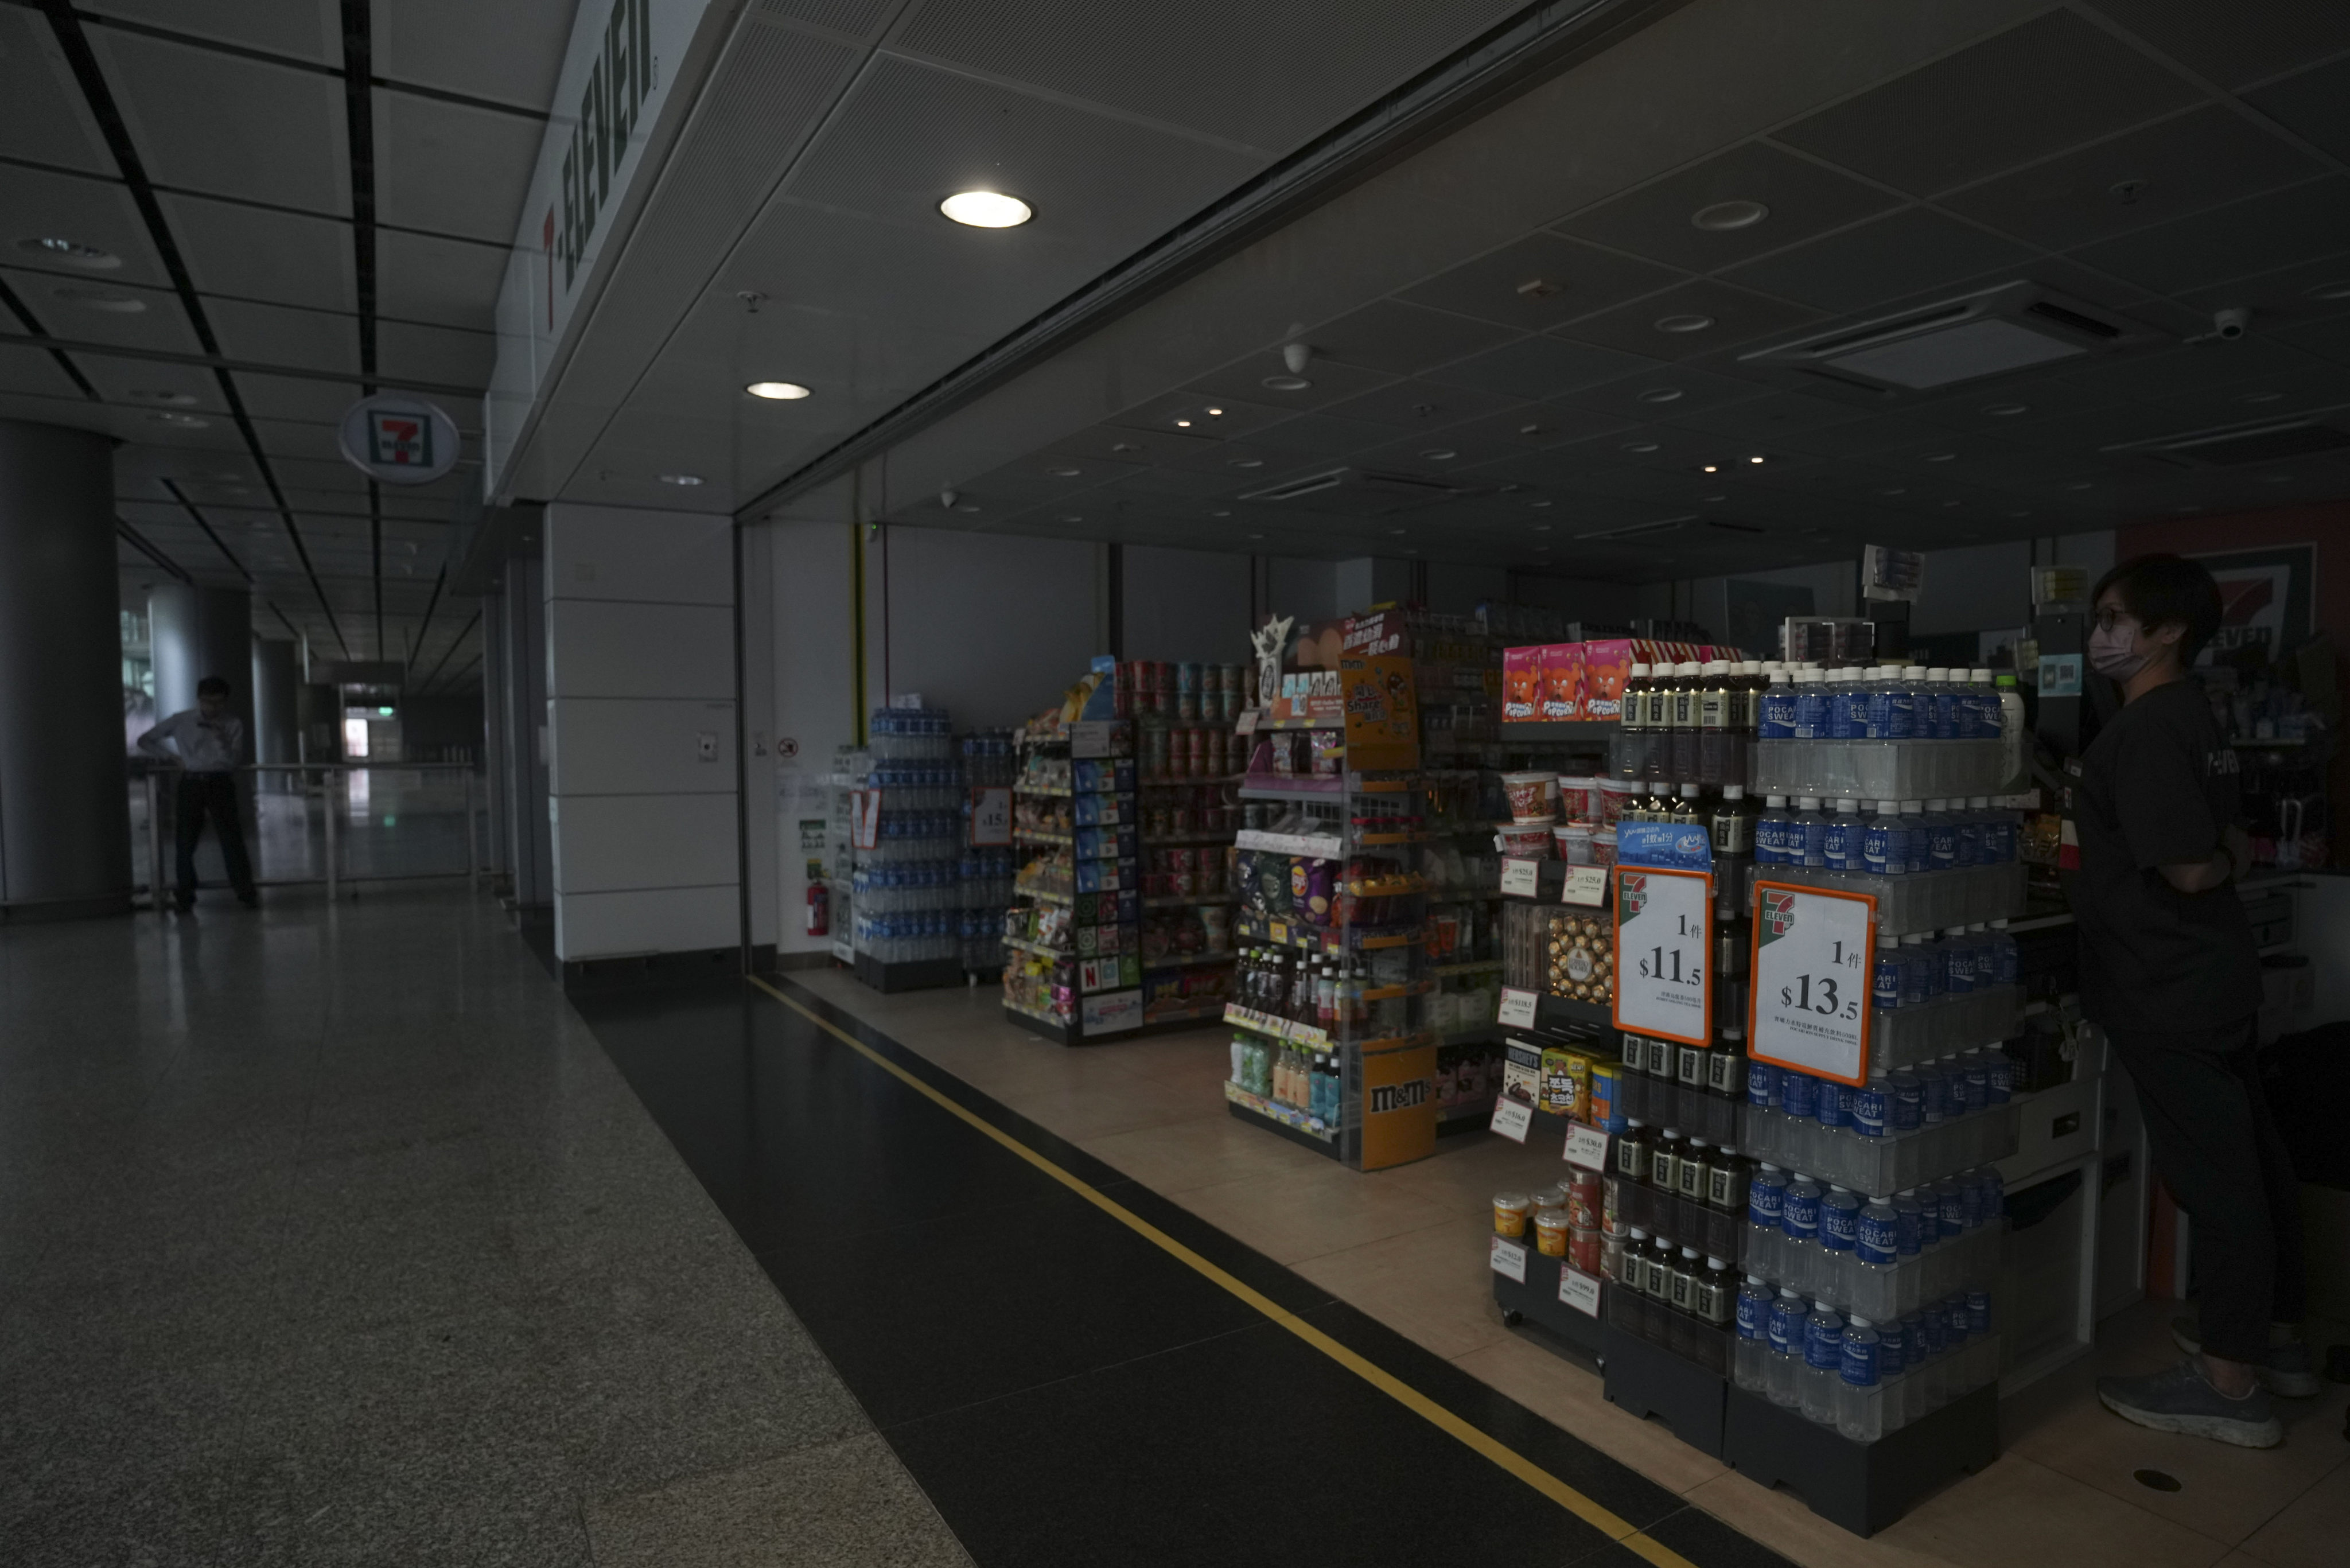 MTR shops were left in the dark on Wednesday, hours after a power outage. Photo: Sam Tsang